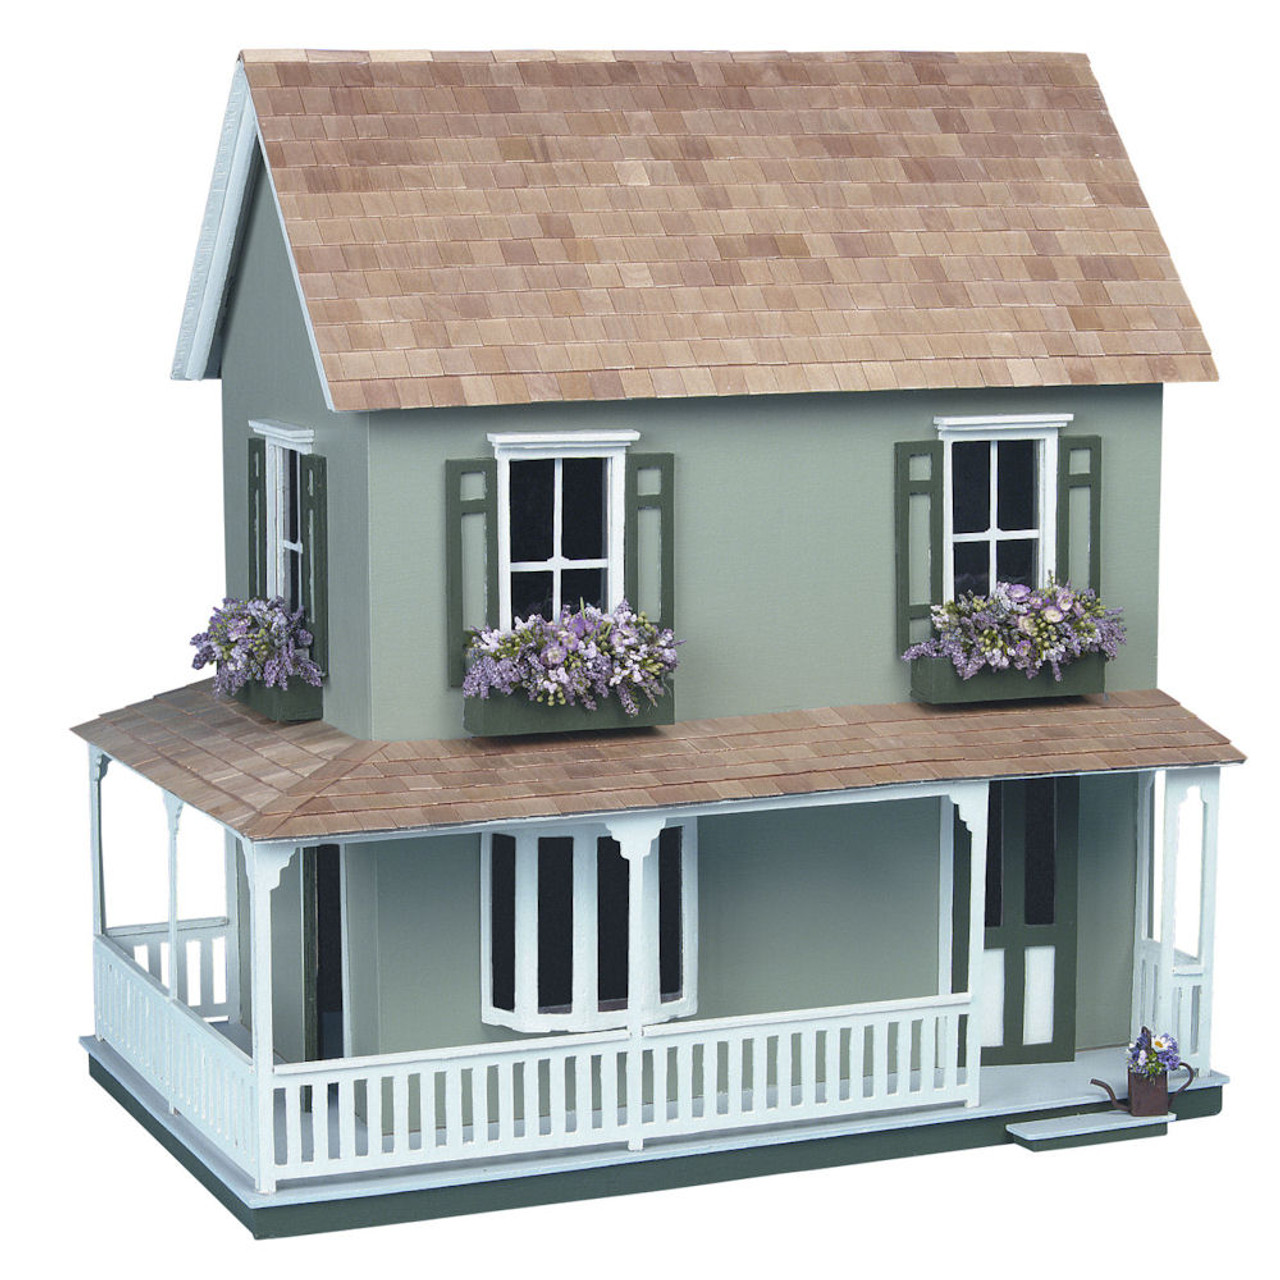 build your own dolls house kit